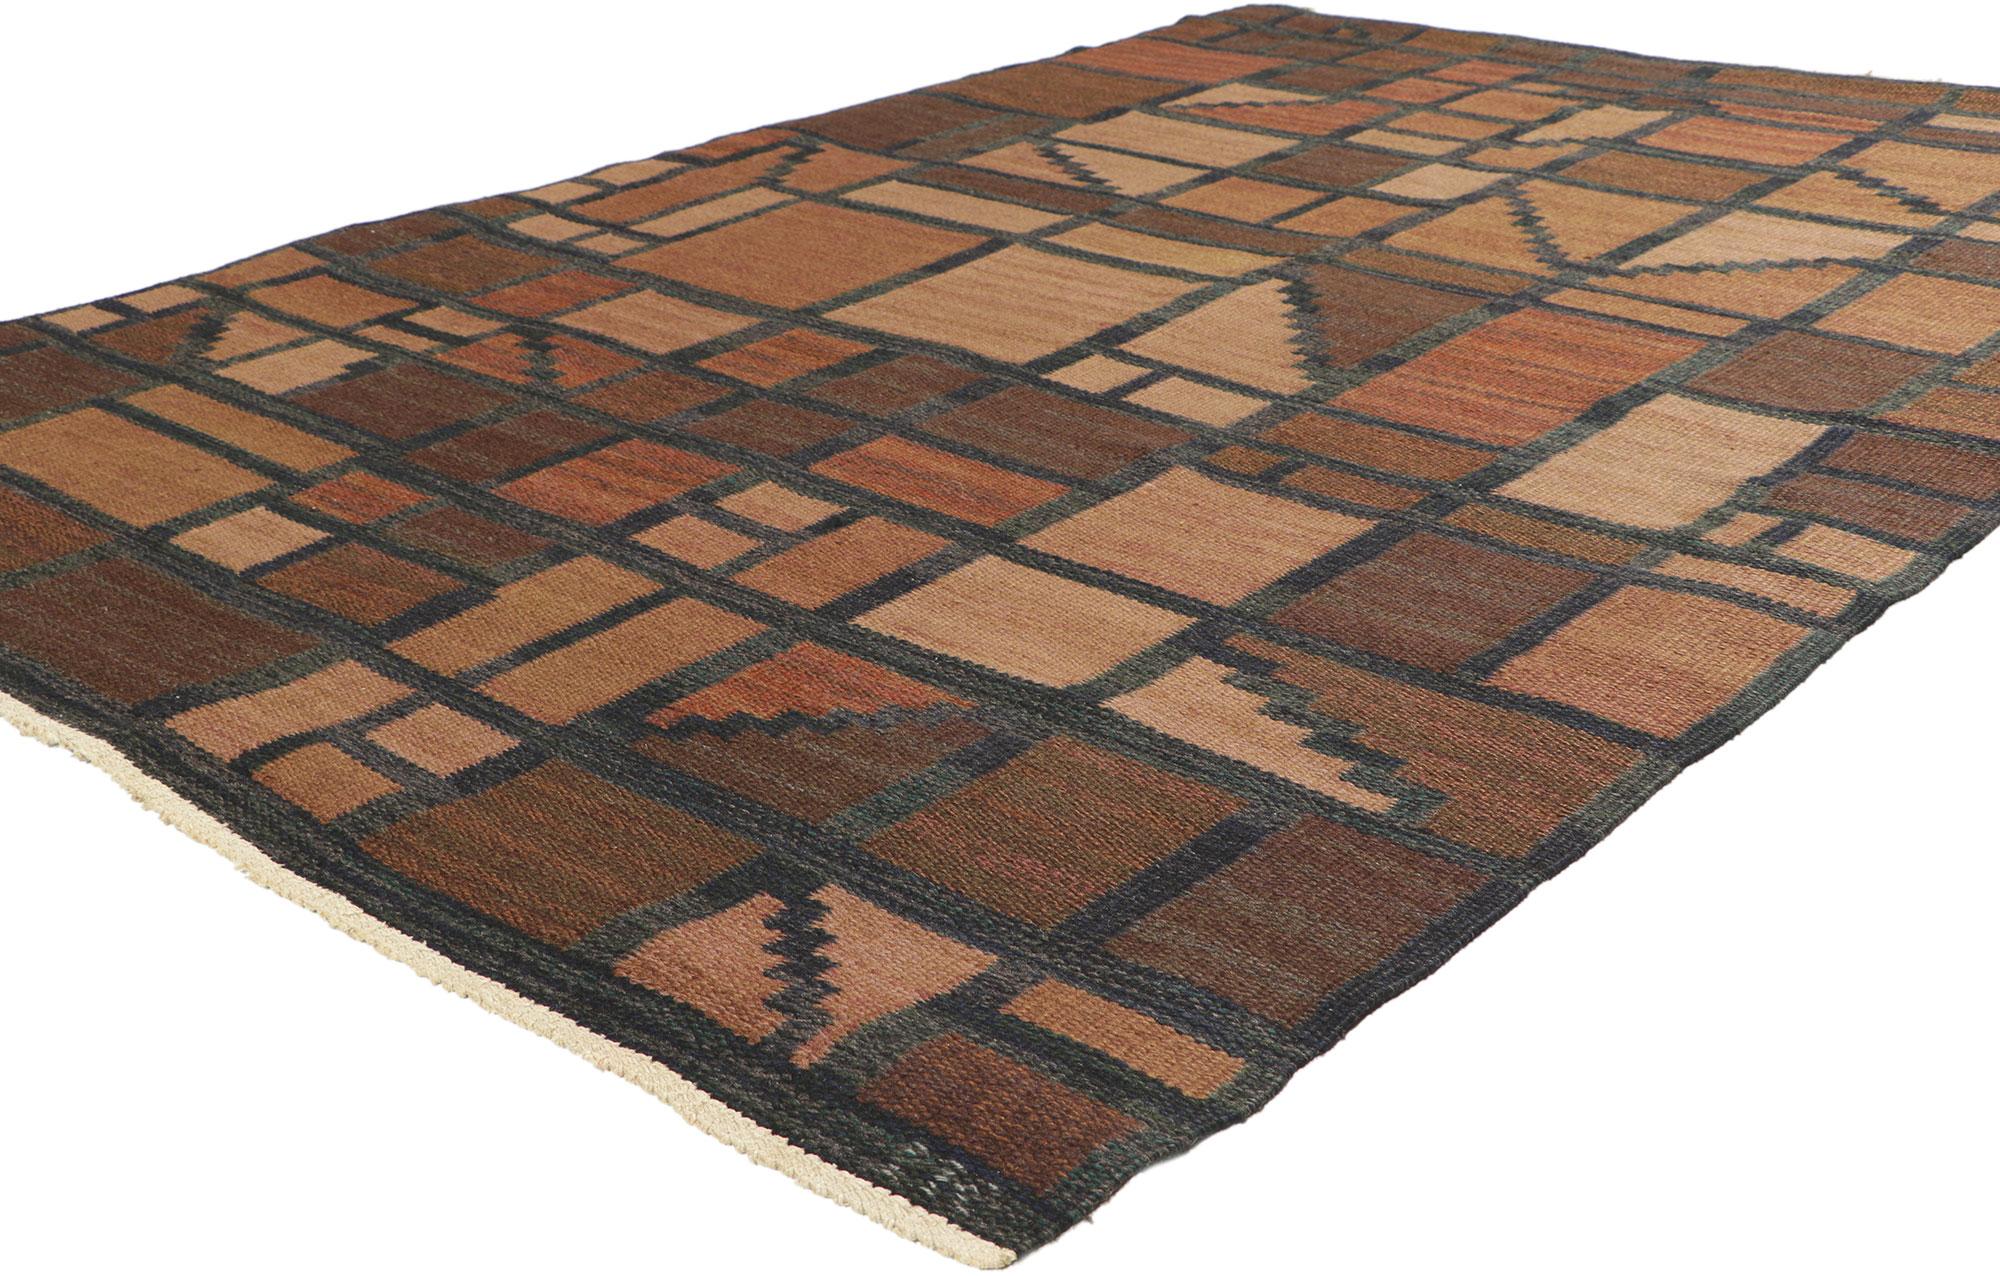 78486 Vintage Swedish Rollakan Rug by Irma Kronlund, 04'11 x 07'02.
?Reflecting well-balanced asymmetry with incredible detail and texture, this handwoven wool Swedish rollakan rug is a captivating vision of woven beauty. The eye-catching geometric